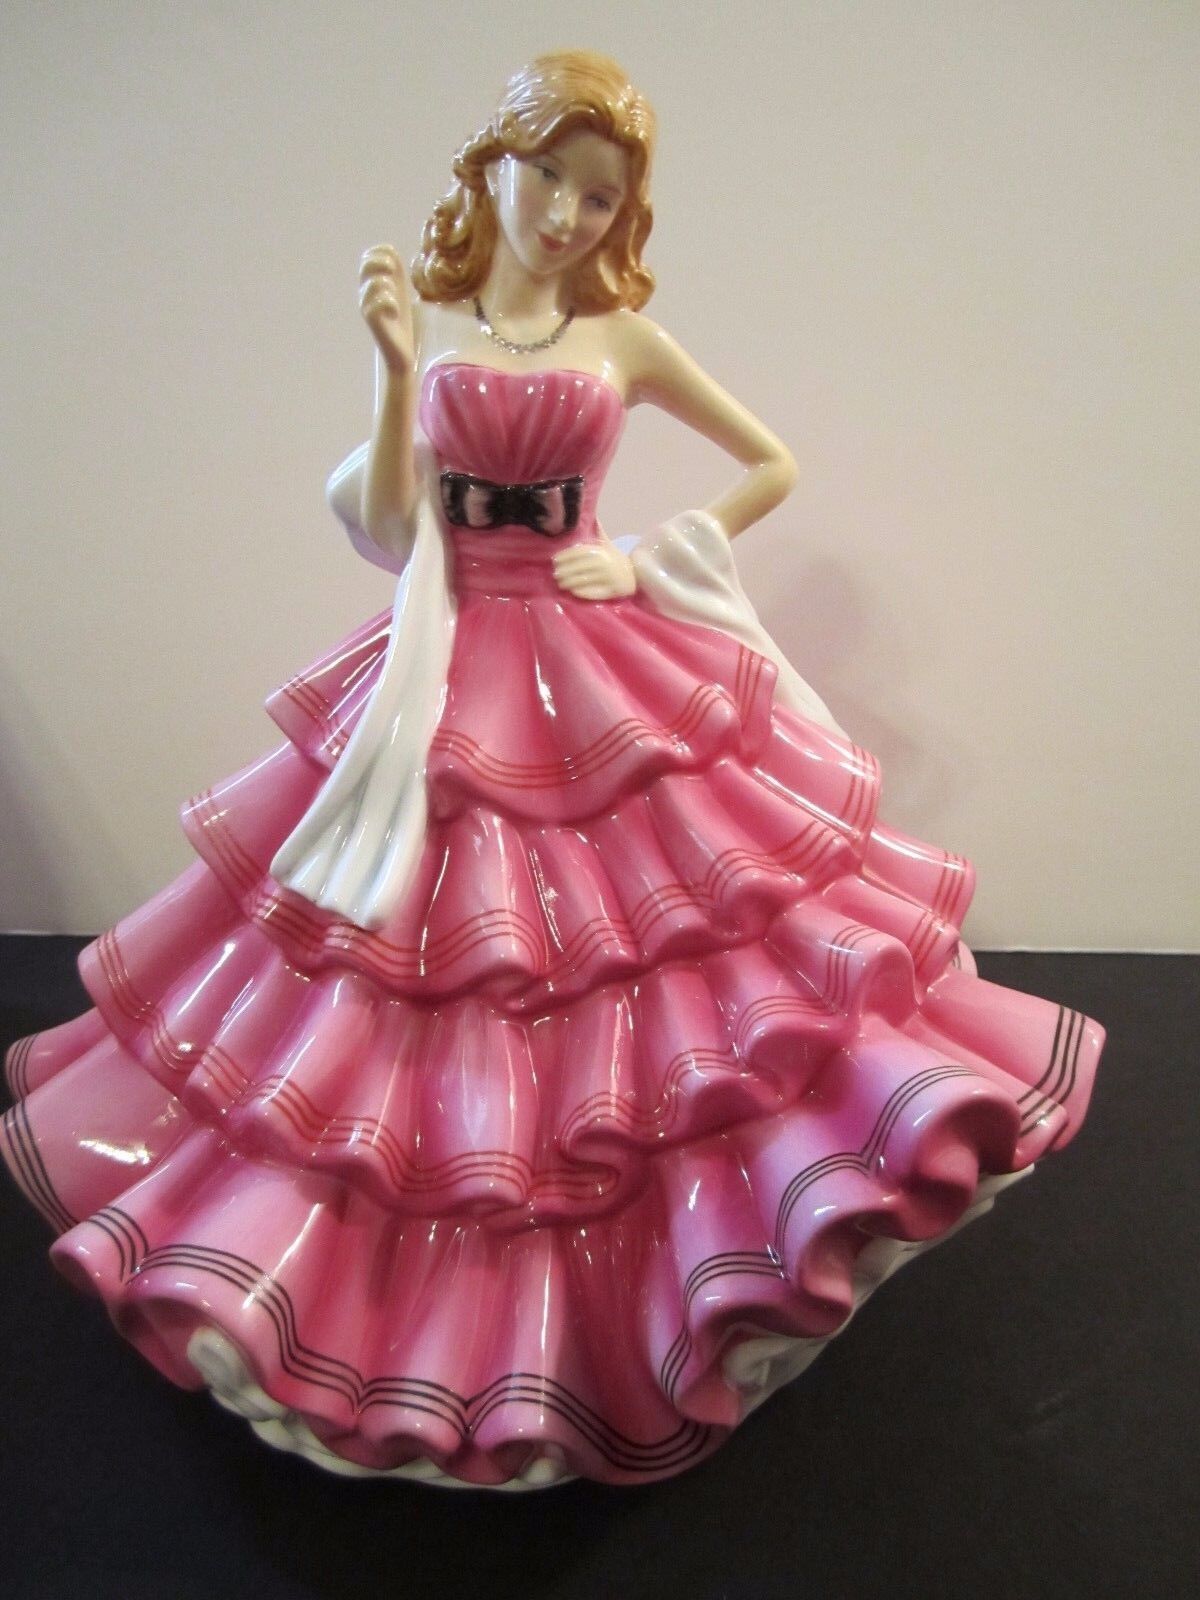 Royal Doulton Rosie HN 5775 Michael Doulton Figurine of the Year 2016 New